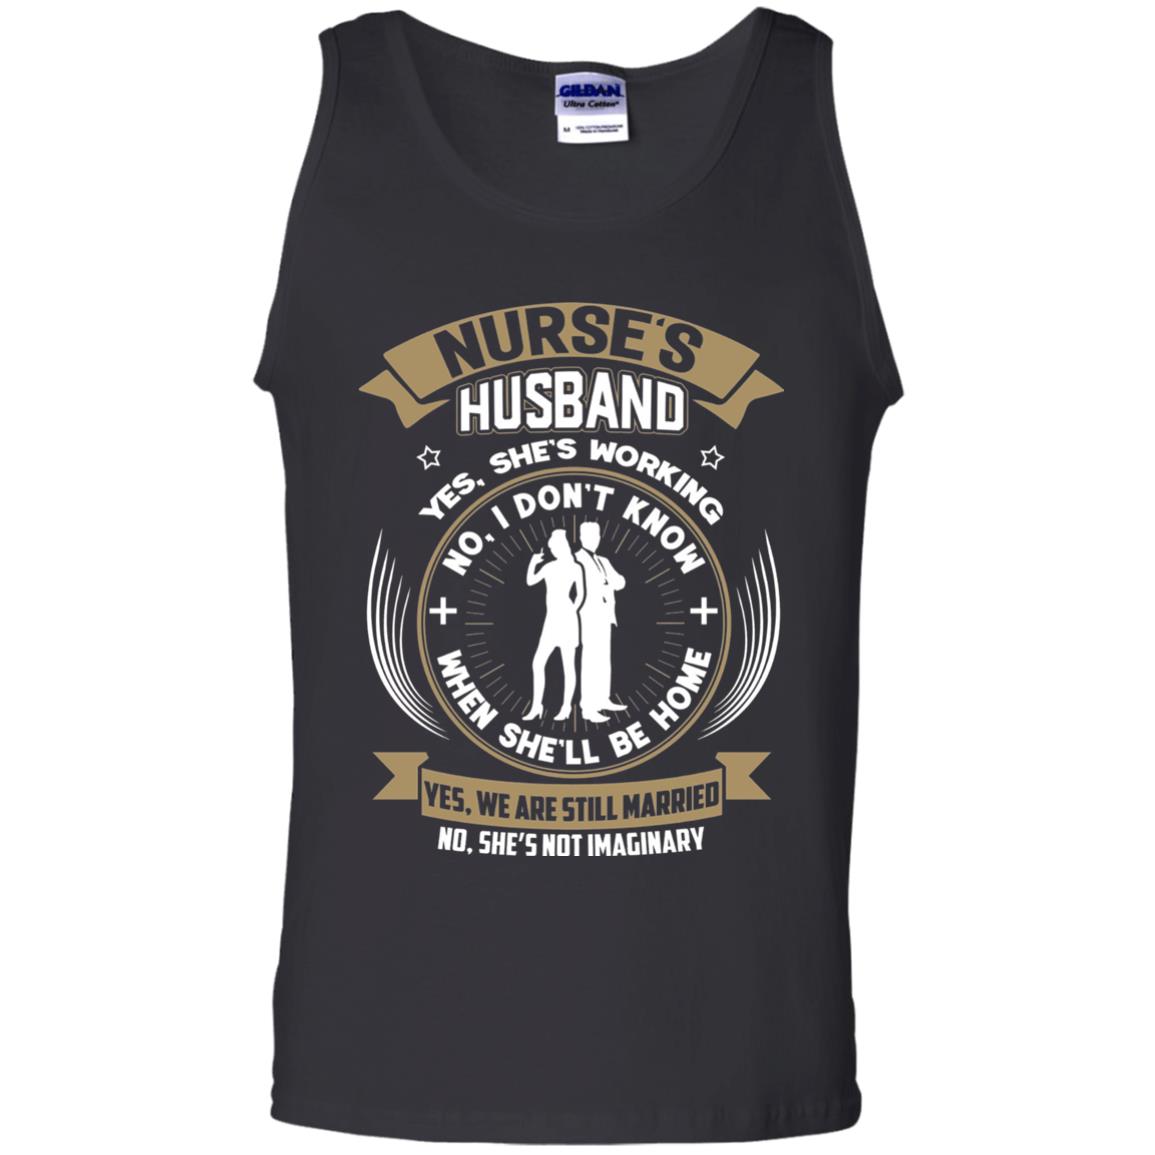 Nurse_s Husband She Is Working When She Will Be Home Shirt